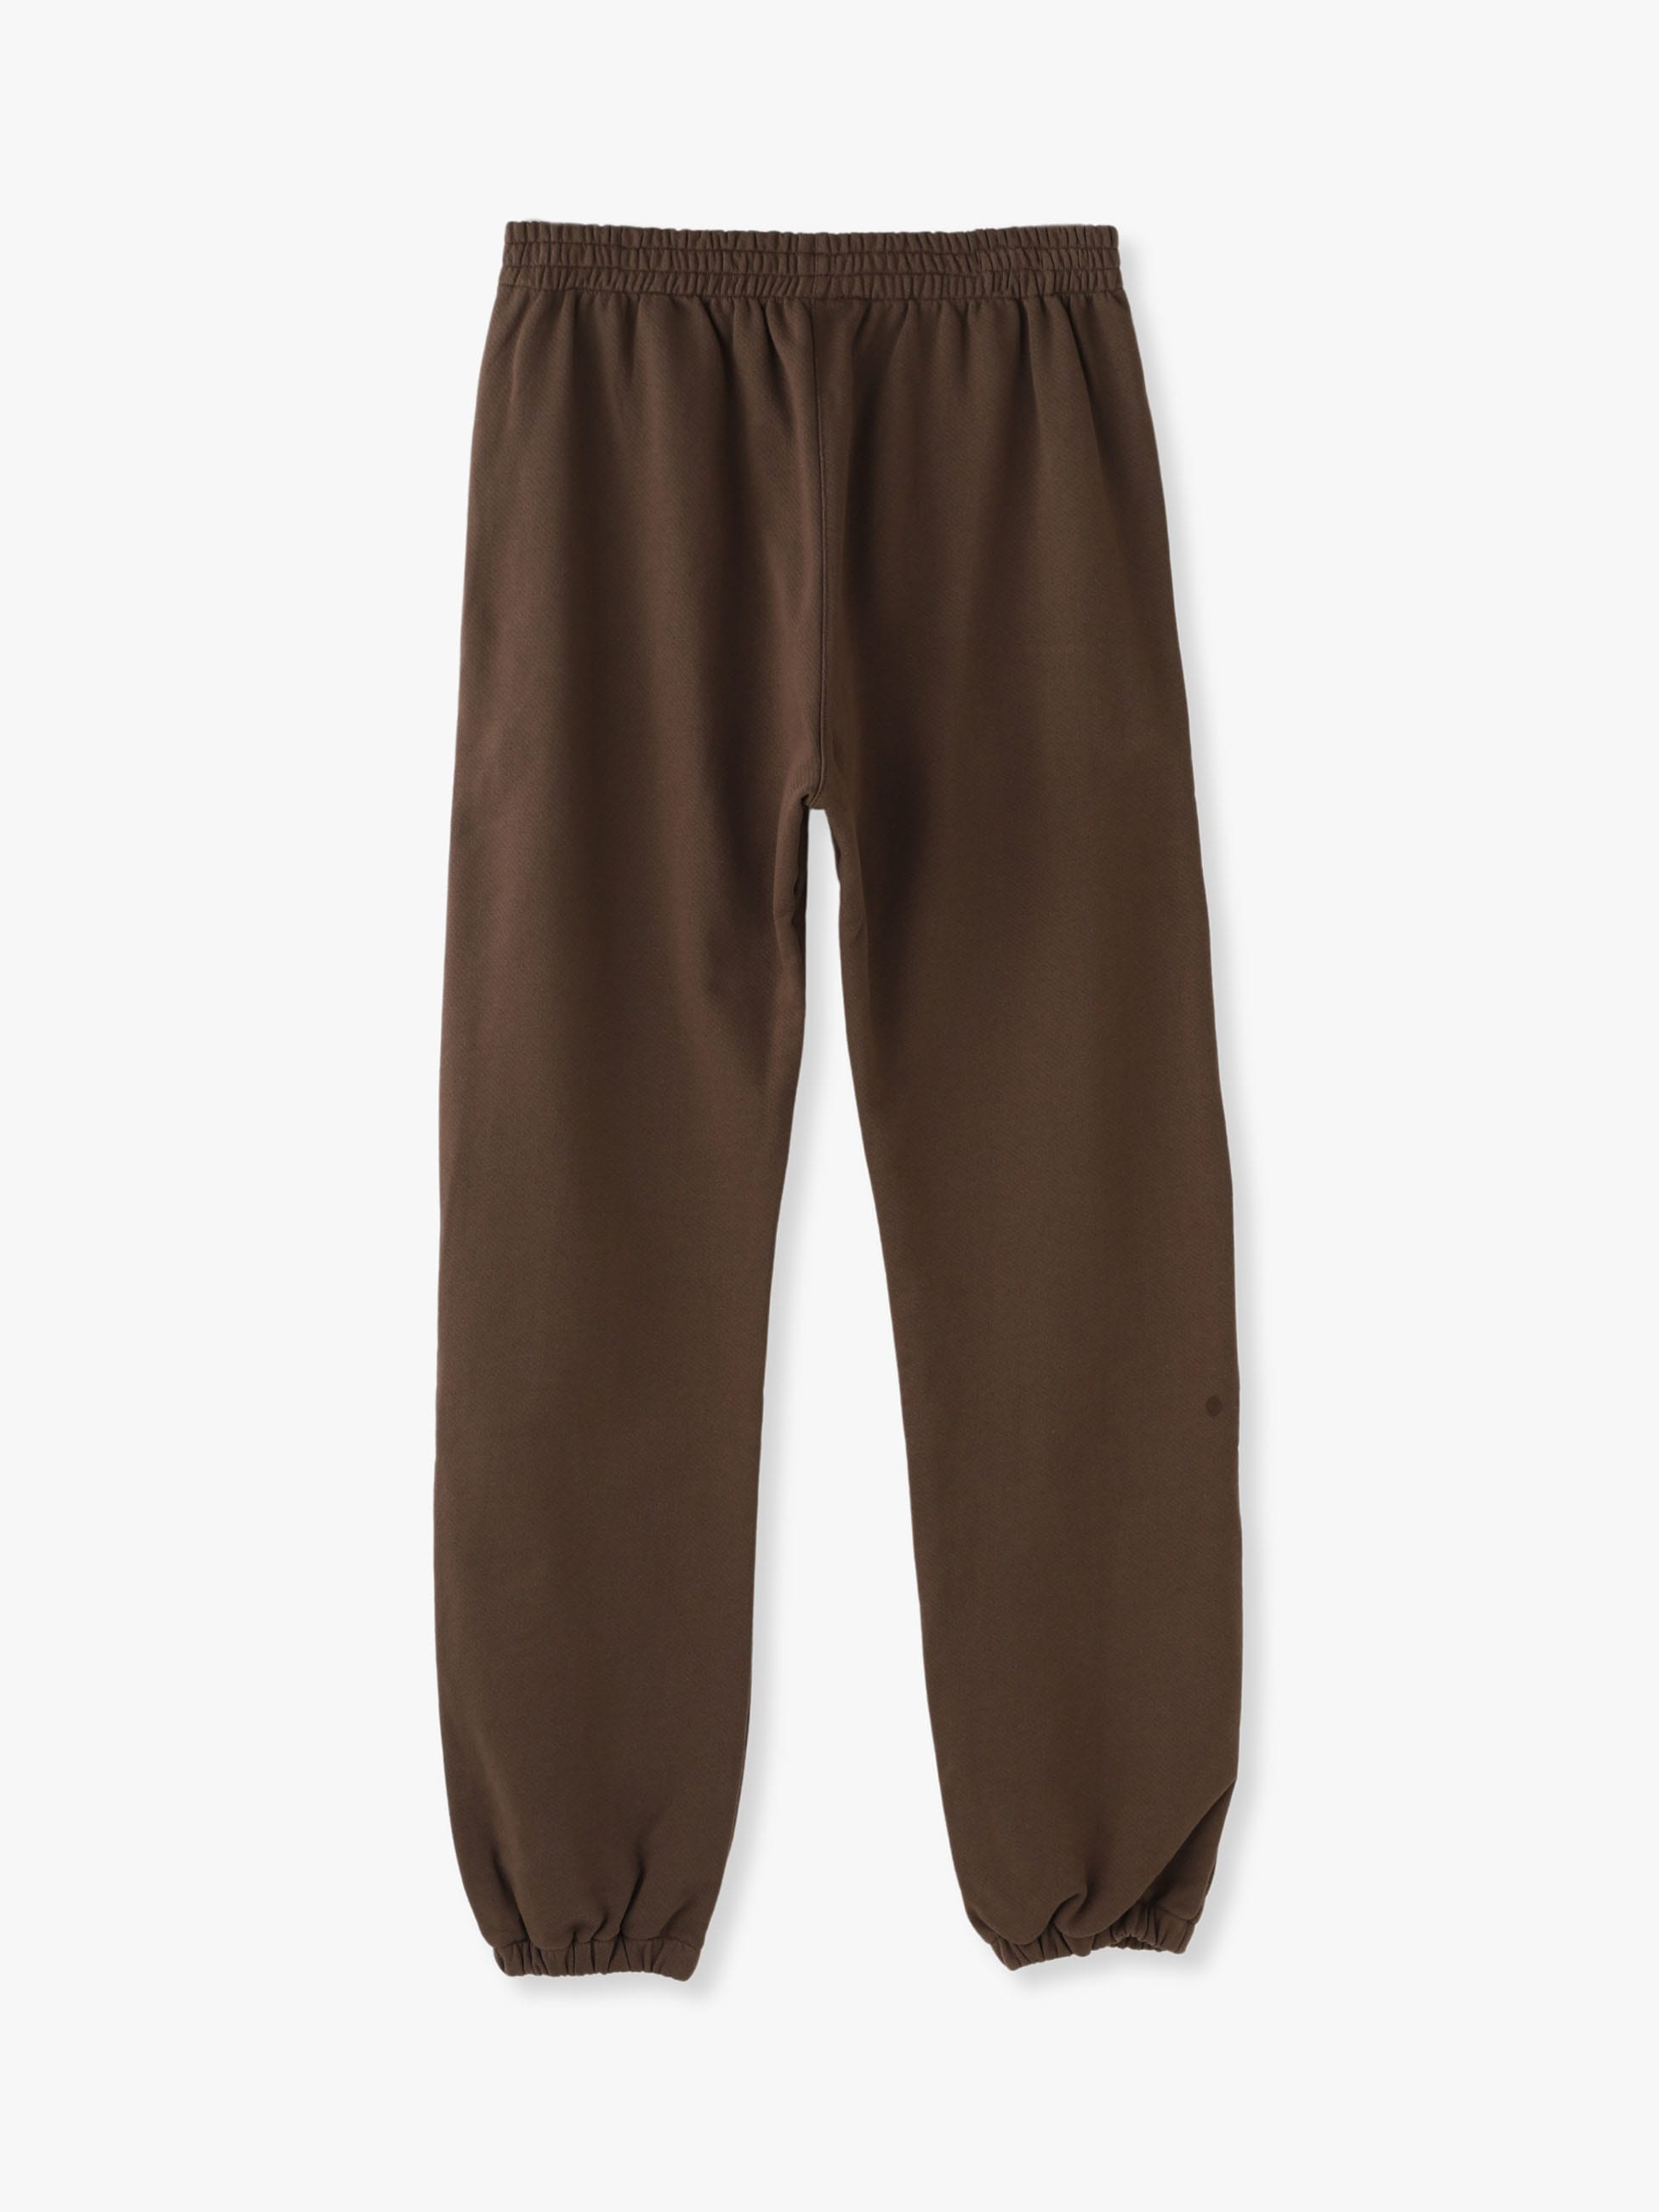 Essential Sweat Pants (red/beige/brown) 詳細画像 red 1